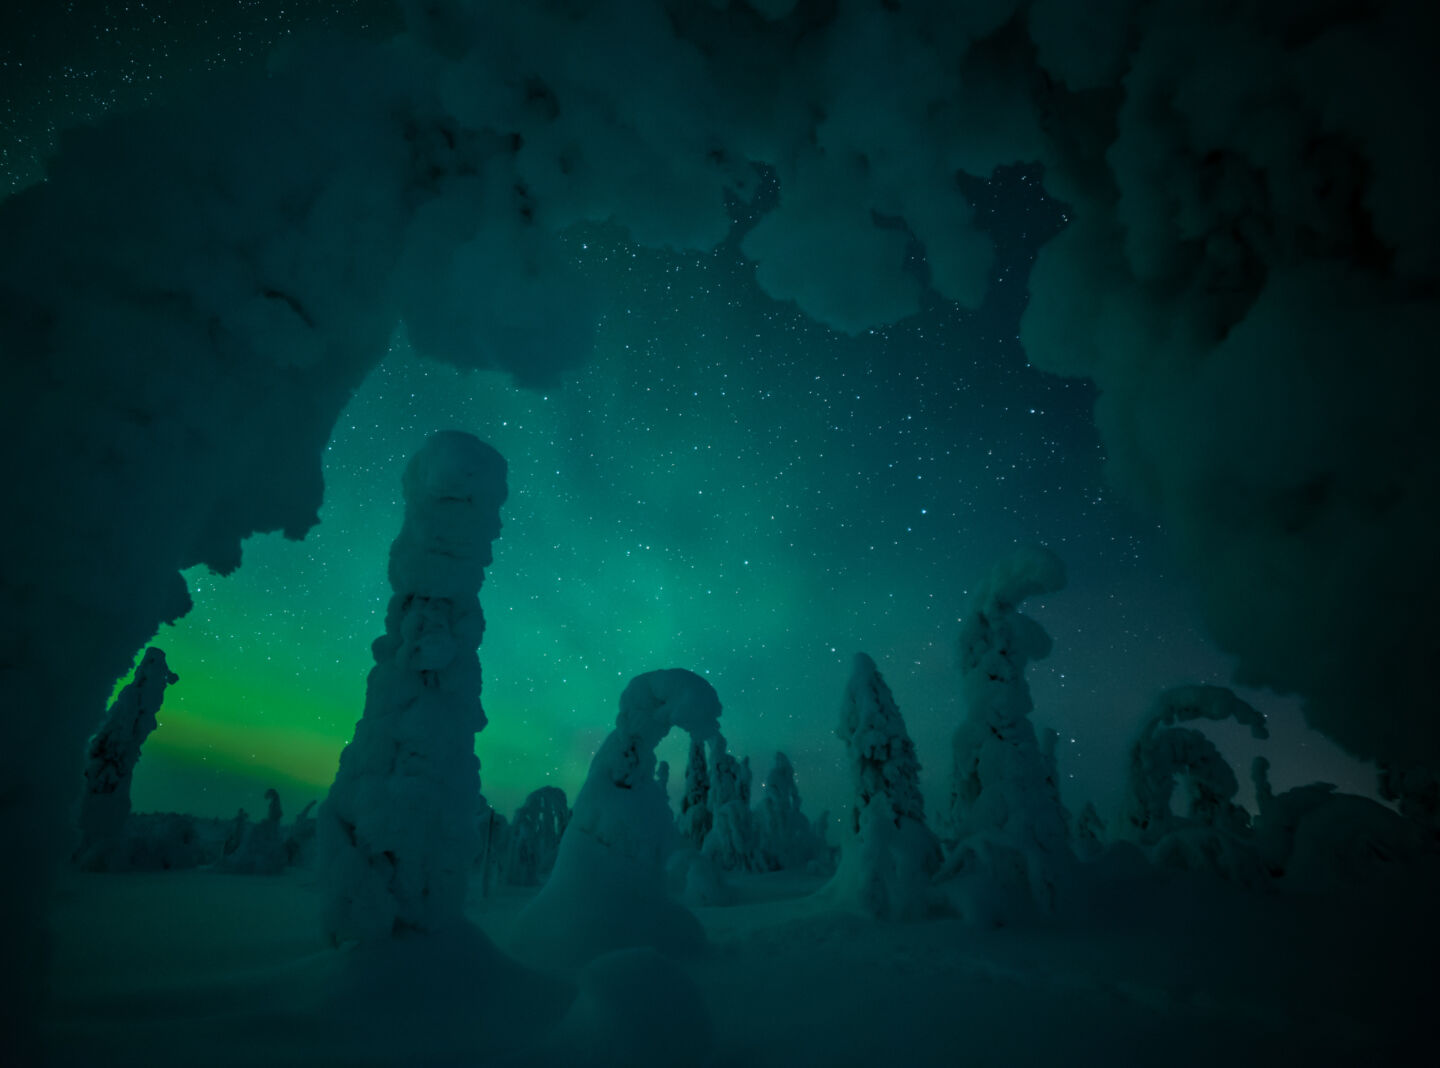 Northern Lights over Posio, a wilderness film location in Finnish Lapland